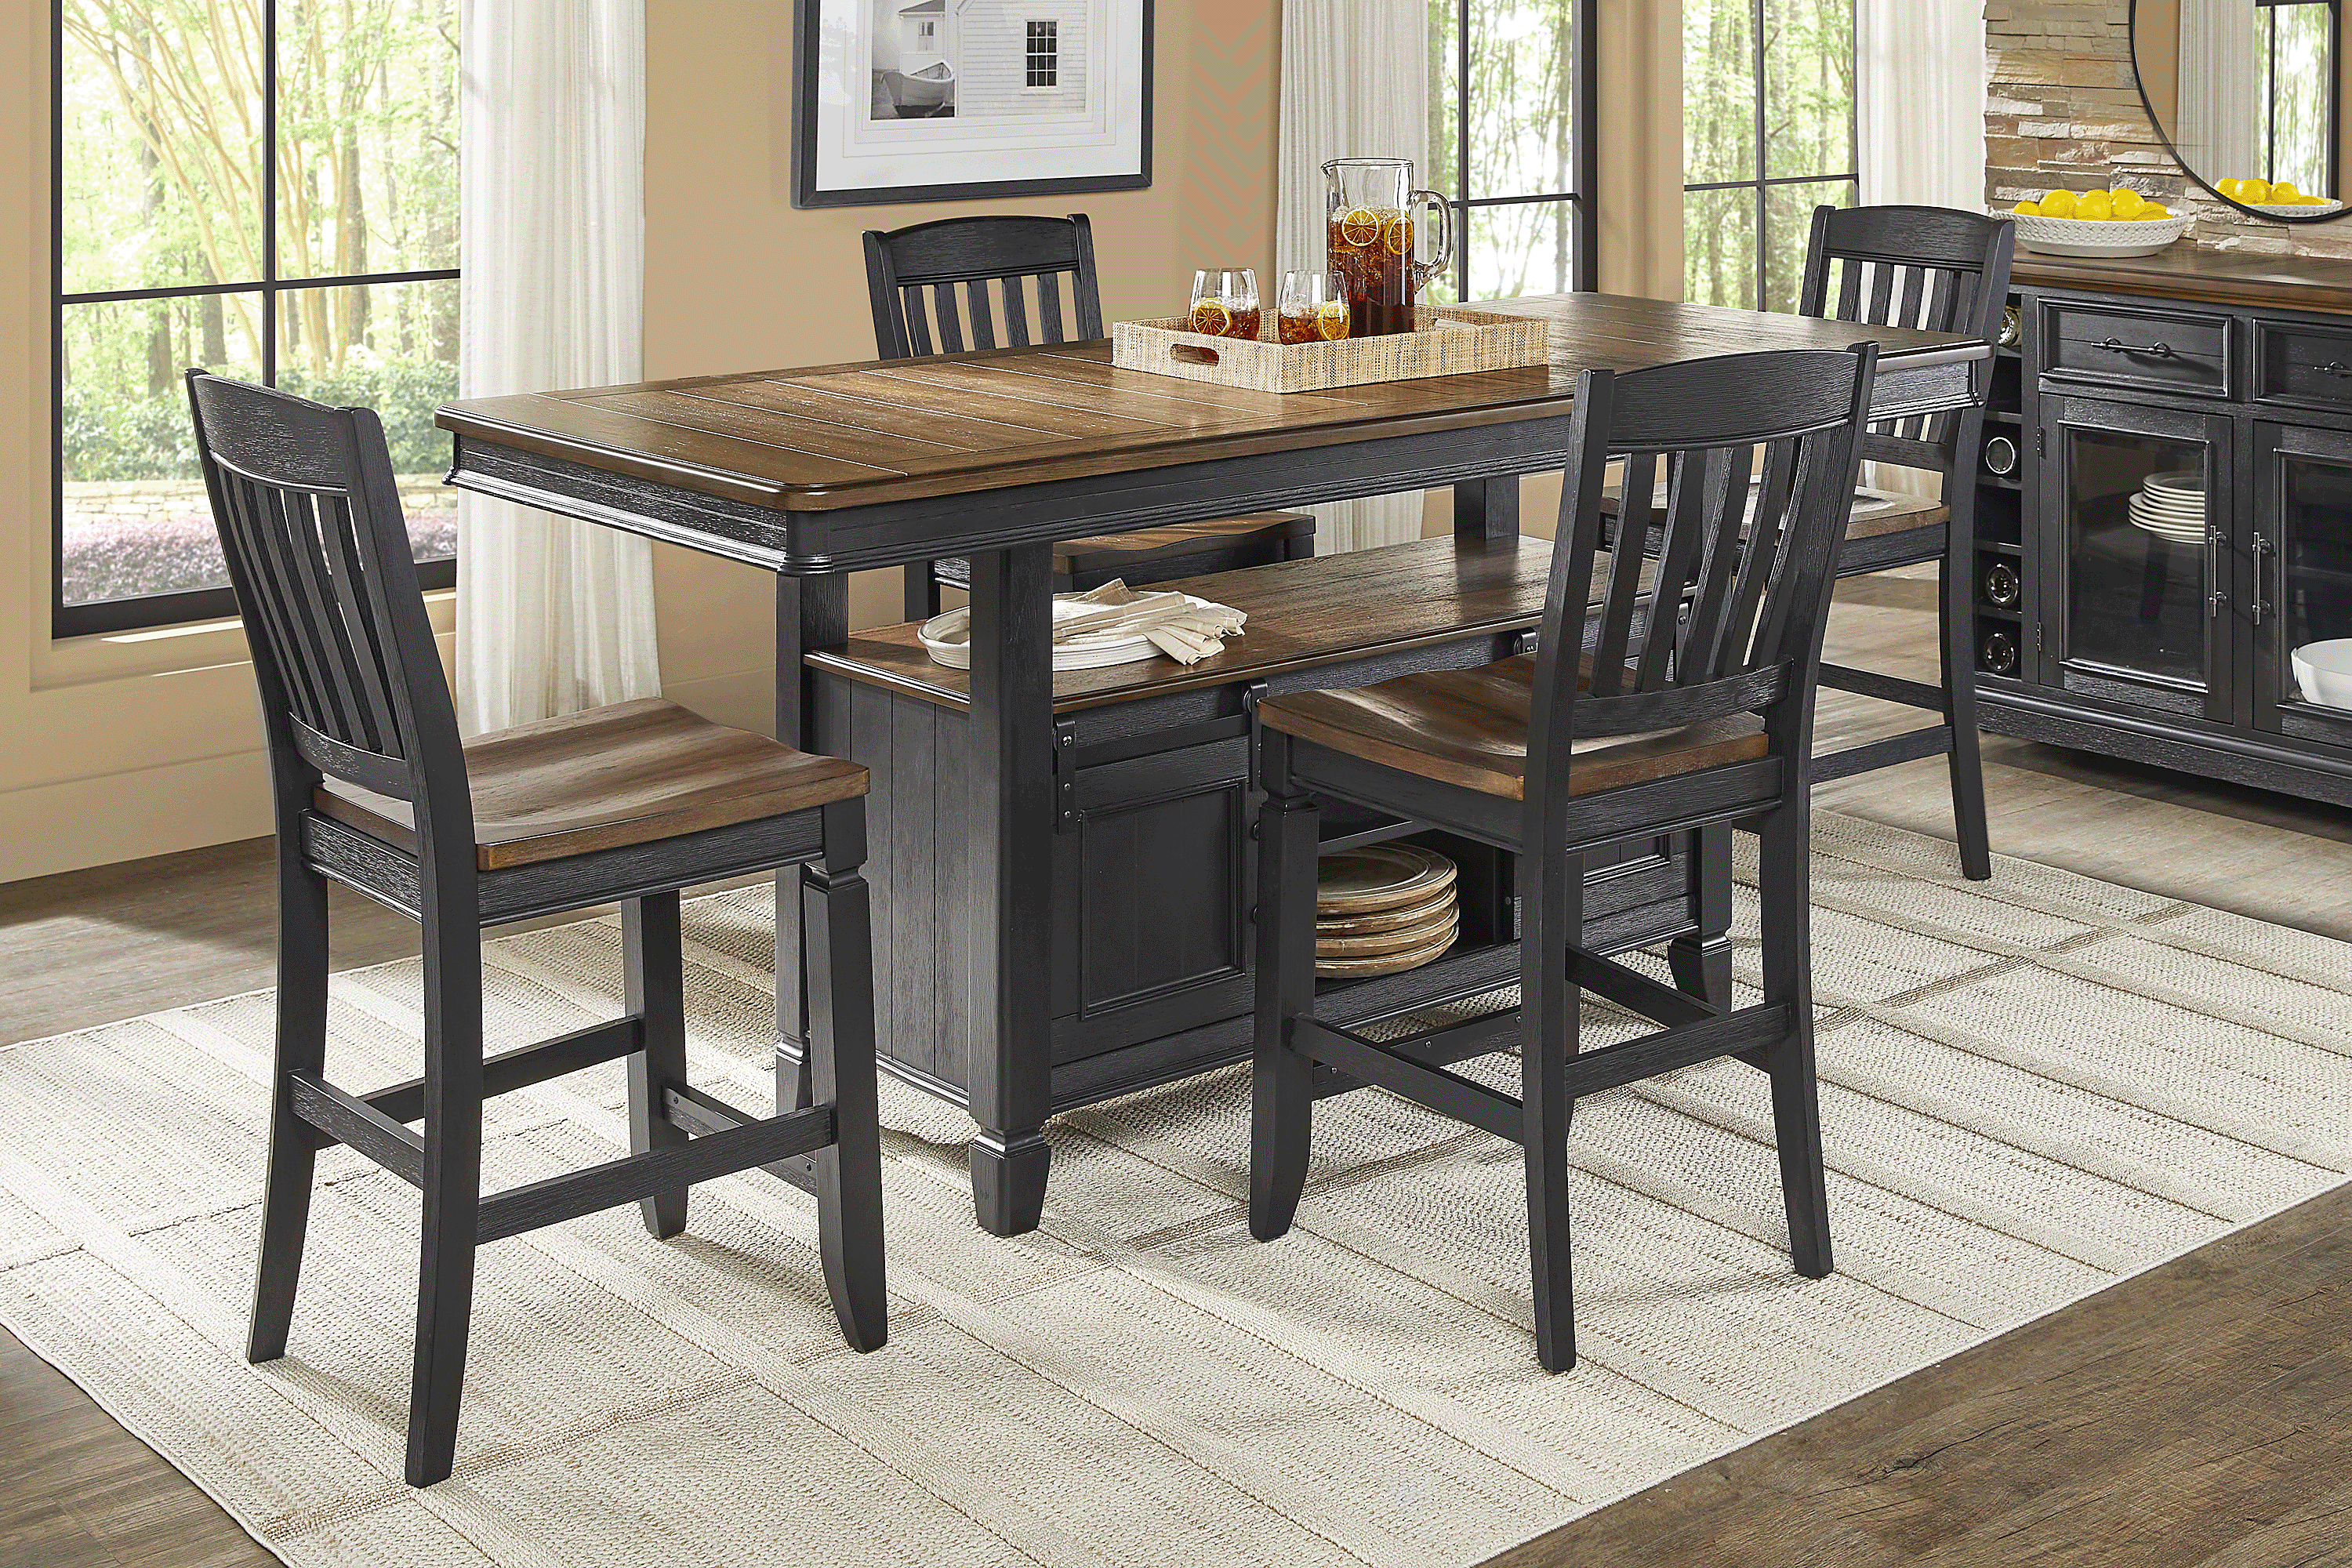 Elevate Your Dining Experience: The Convenience of a Counter Height Table with Storage